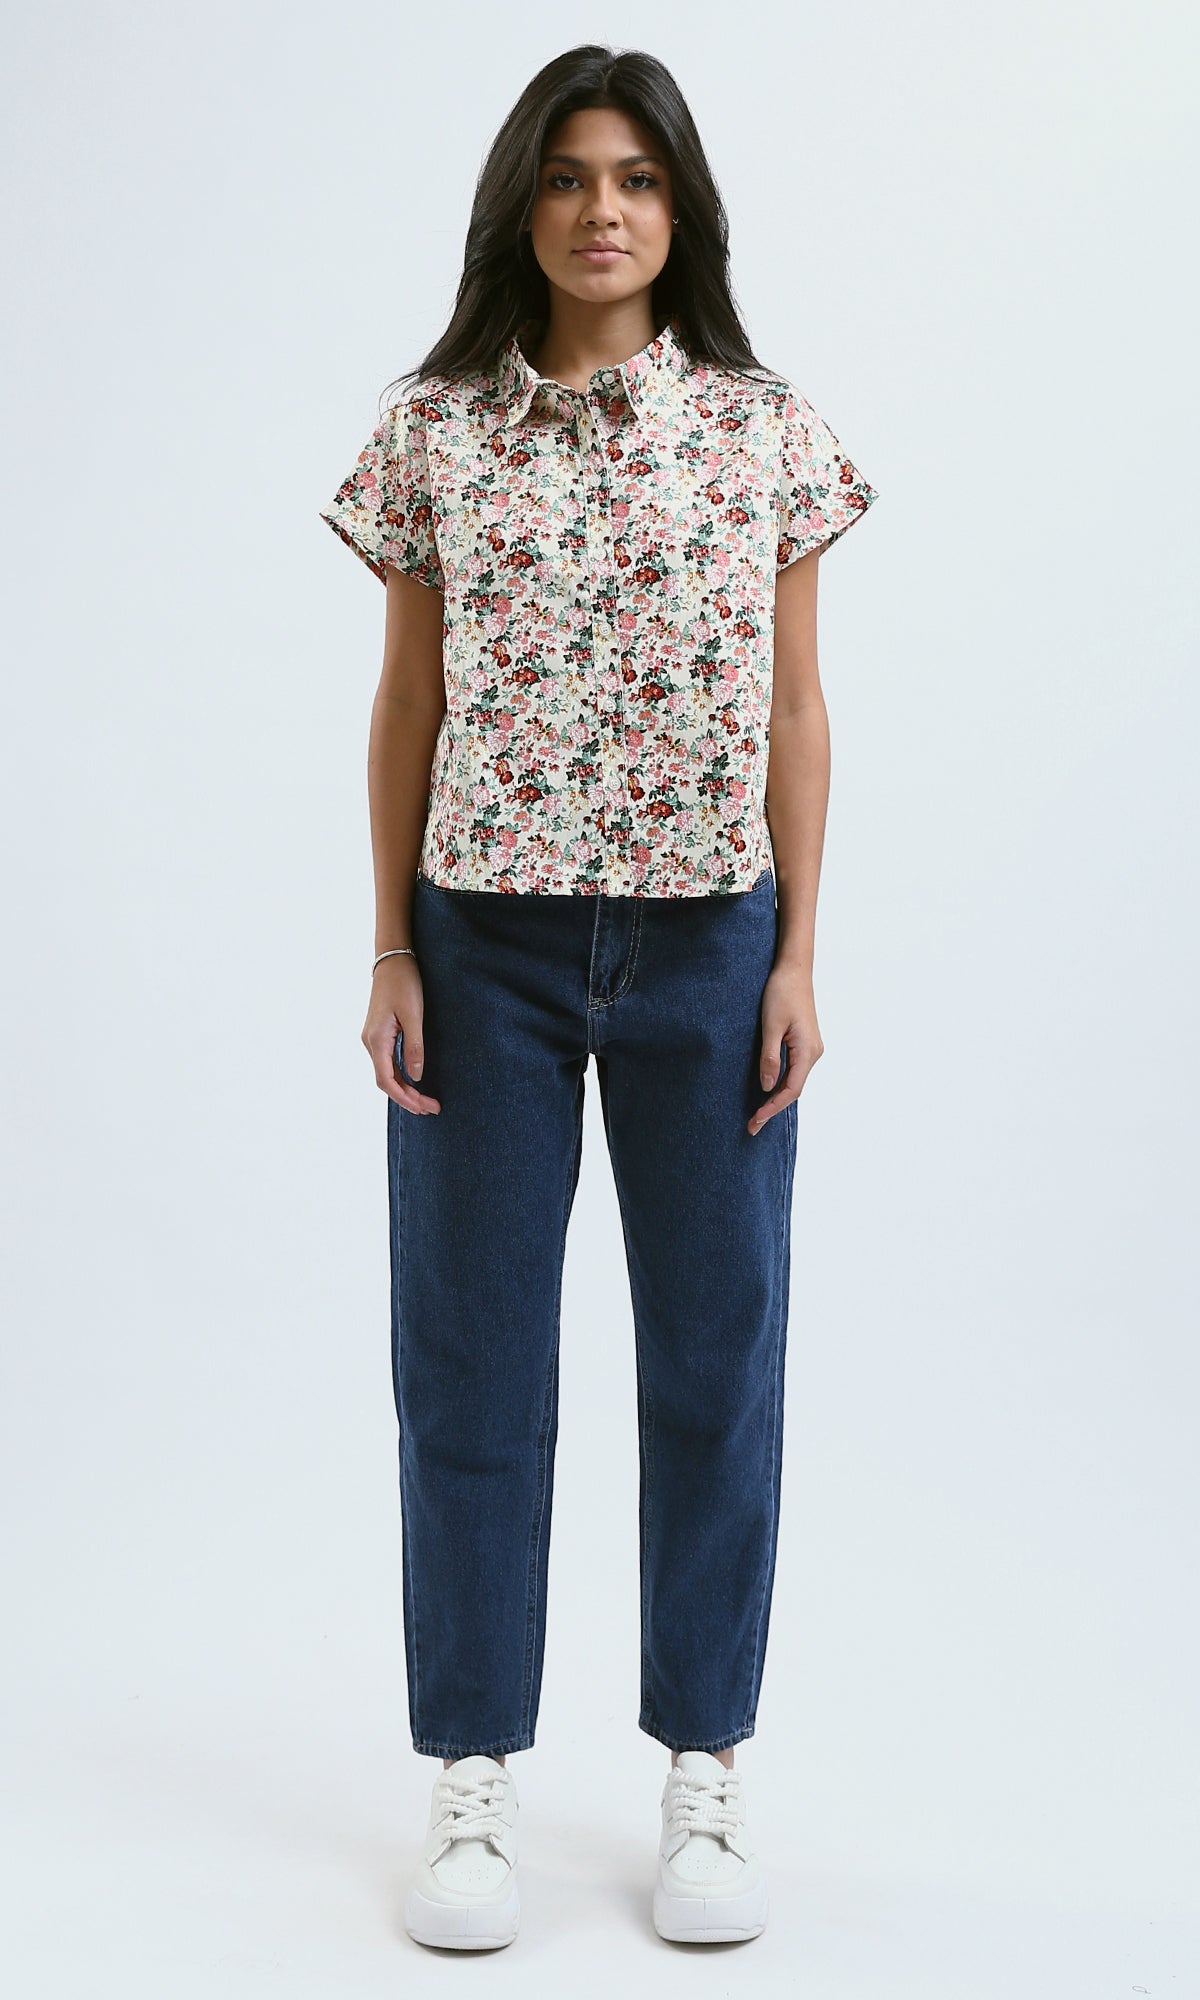 O183096 Short Sleeves Floral Shirt With Classic Collar - Multicolour